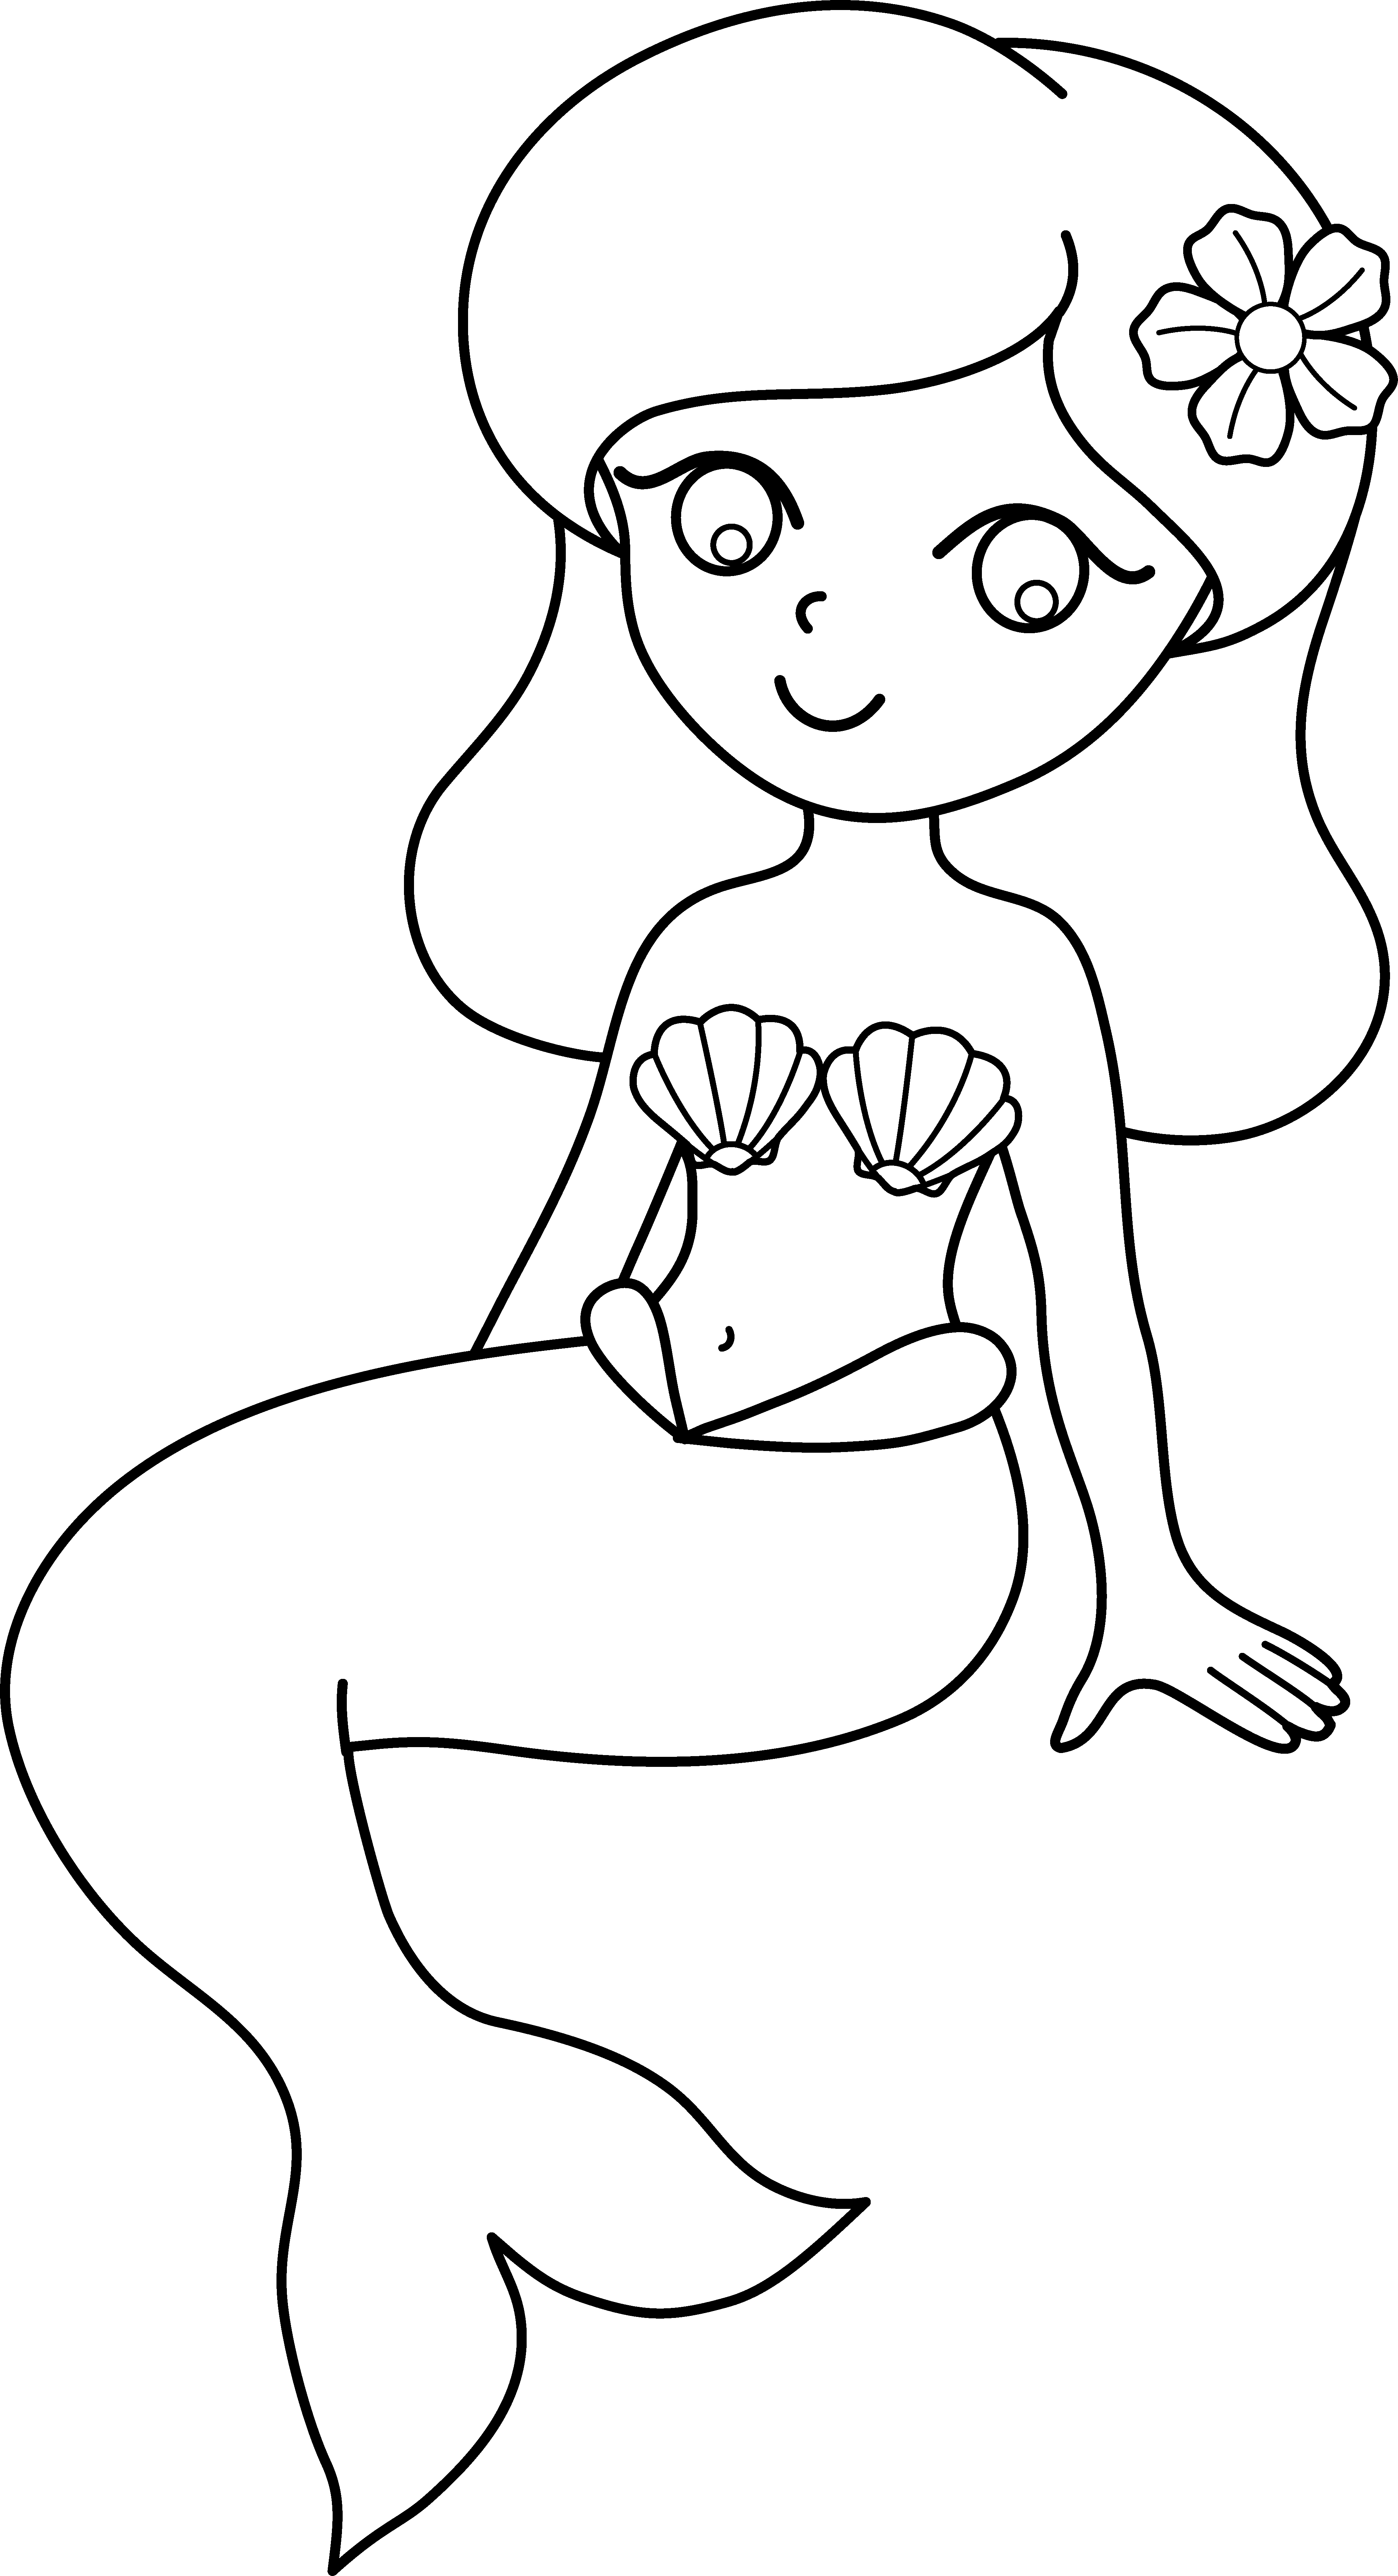 Cute Colorable Mermaid Design Clip Art Coloring Page Id 29679